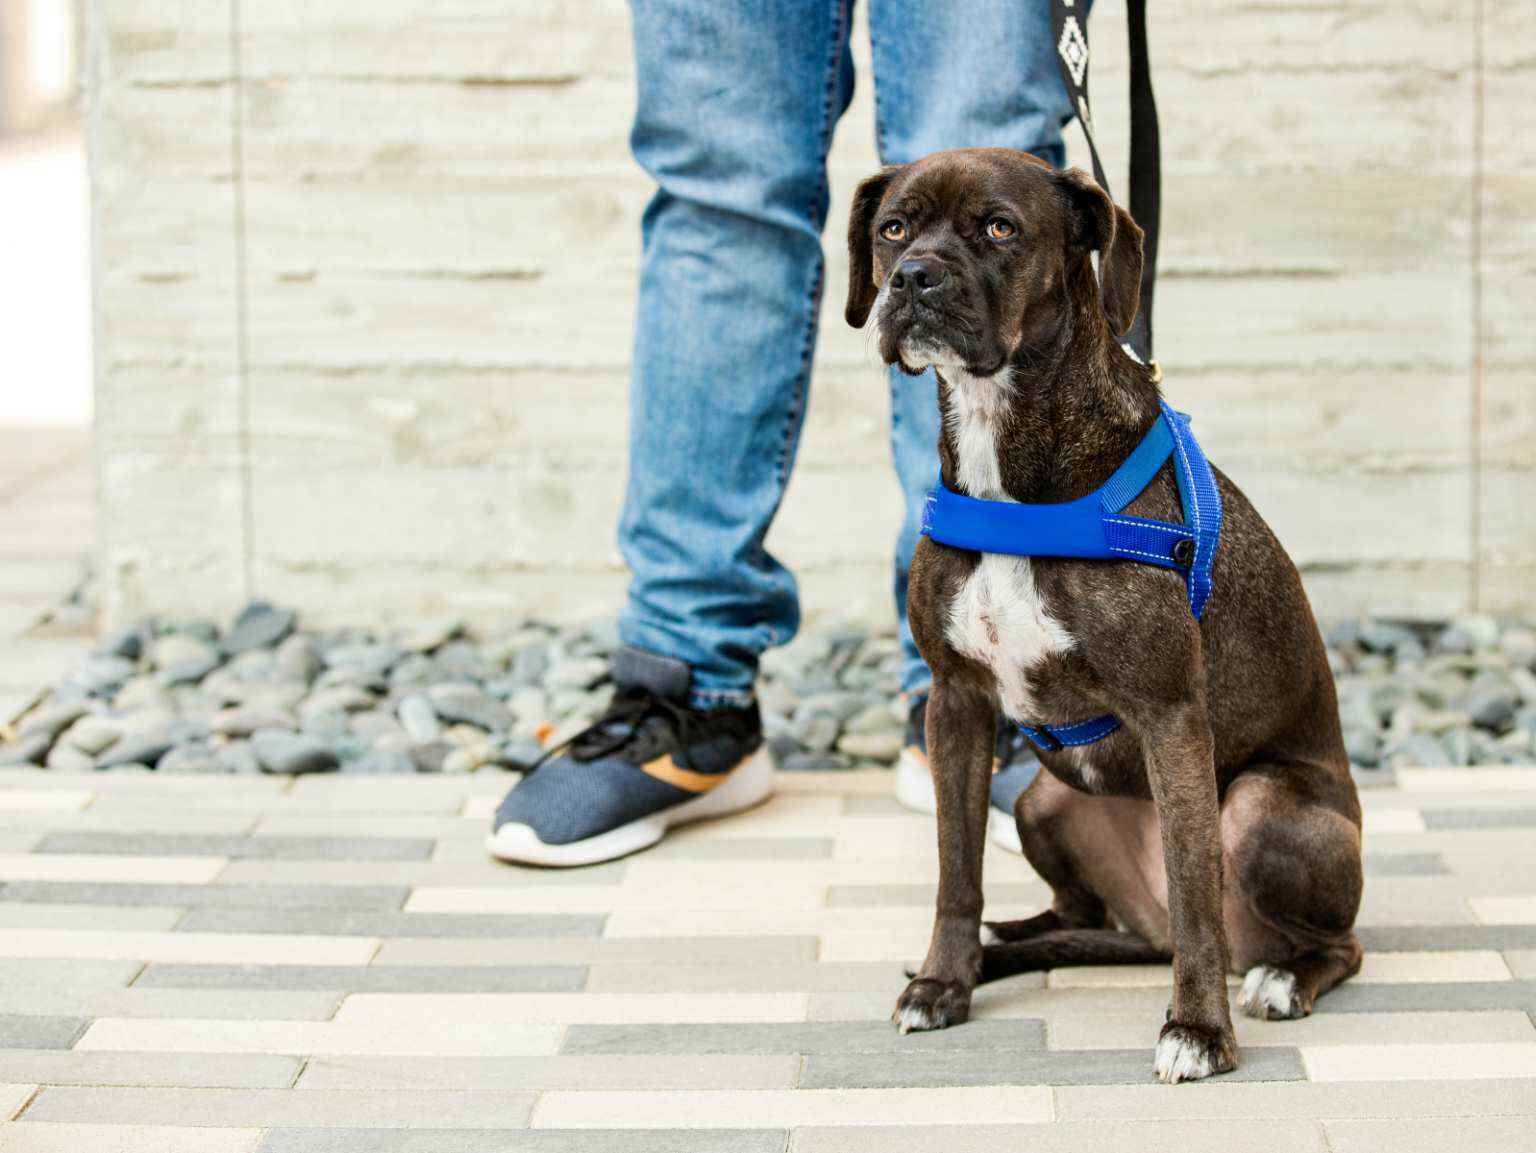 A Brindle Boxer dog wearing a blue harness